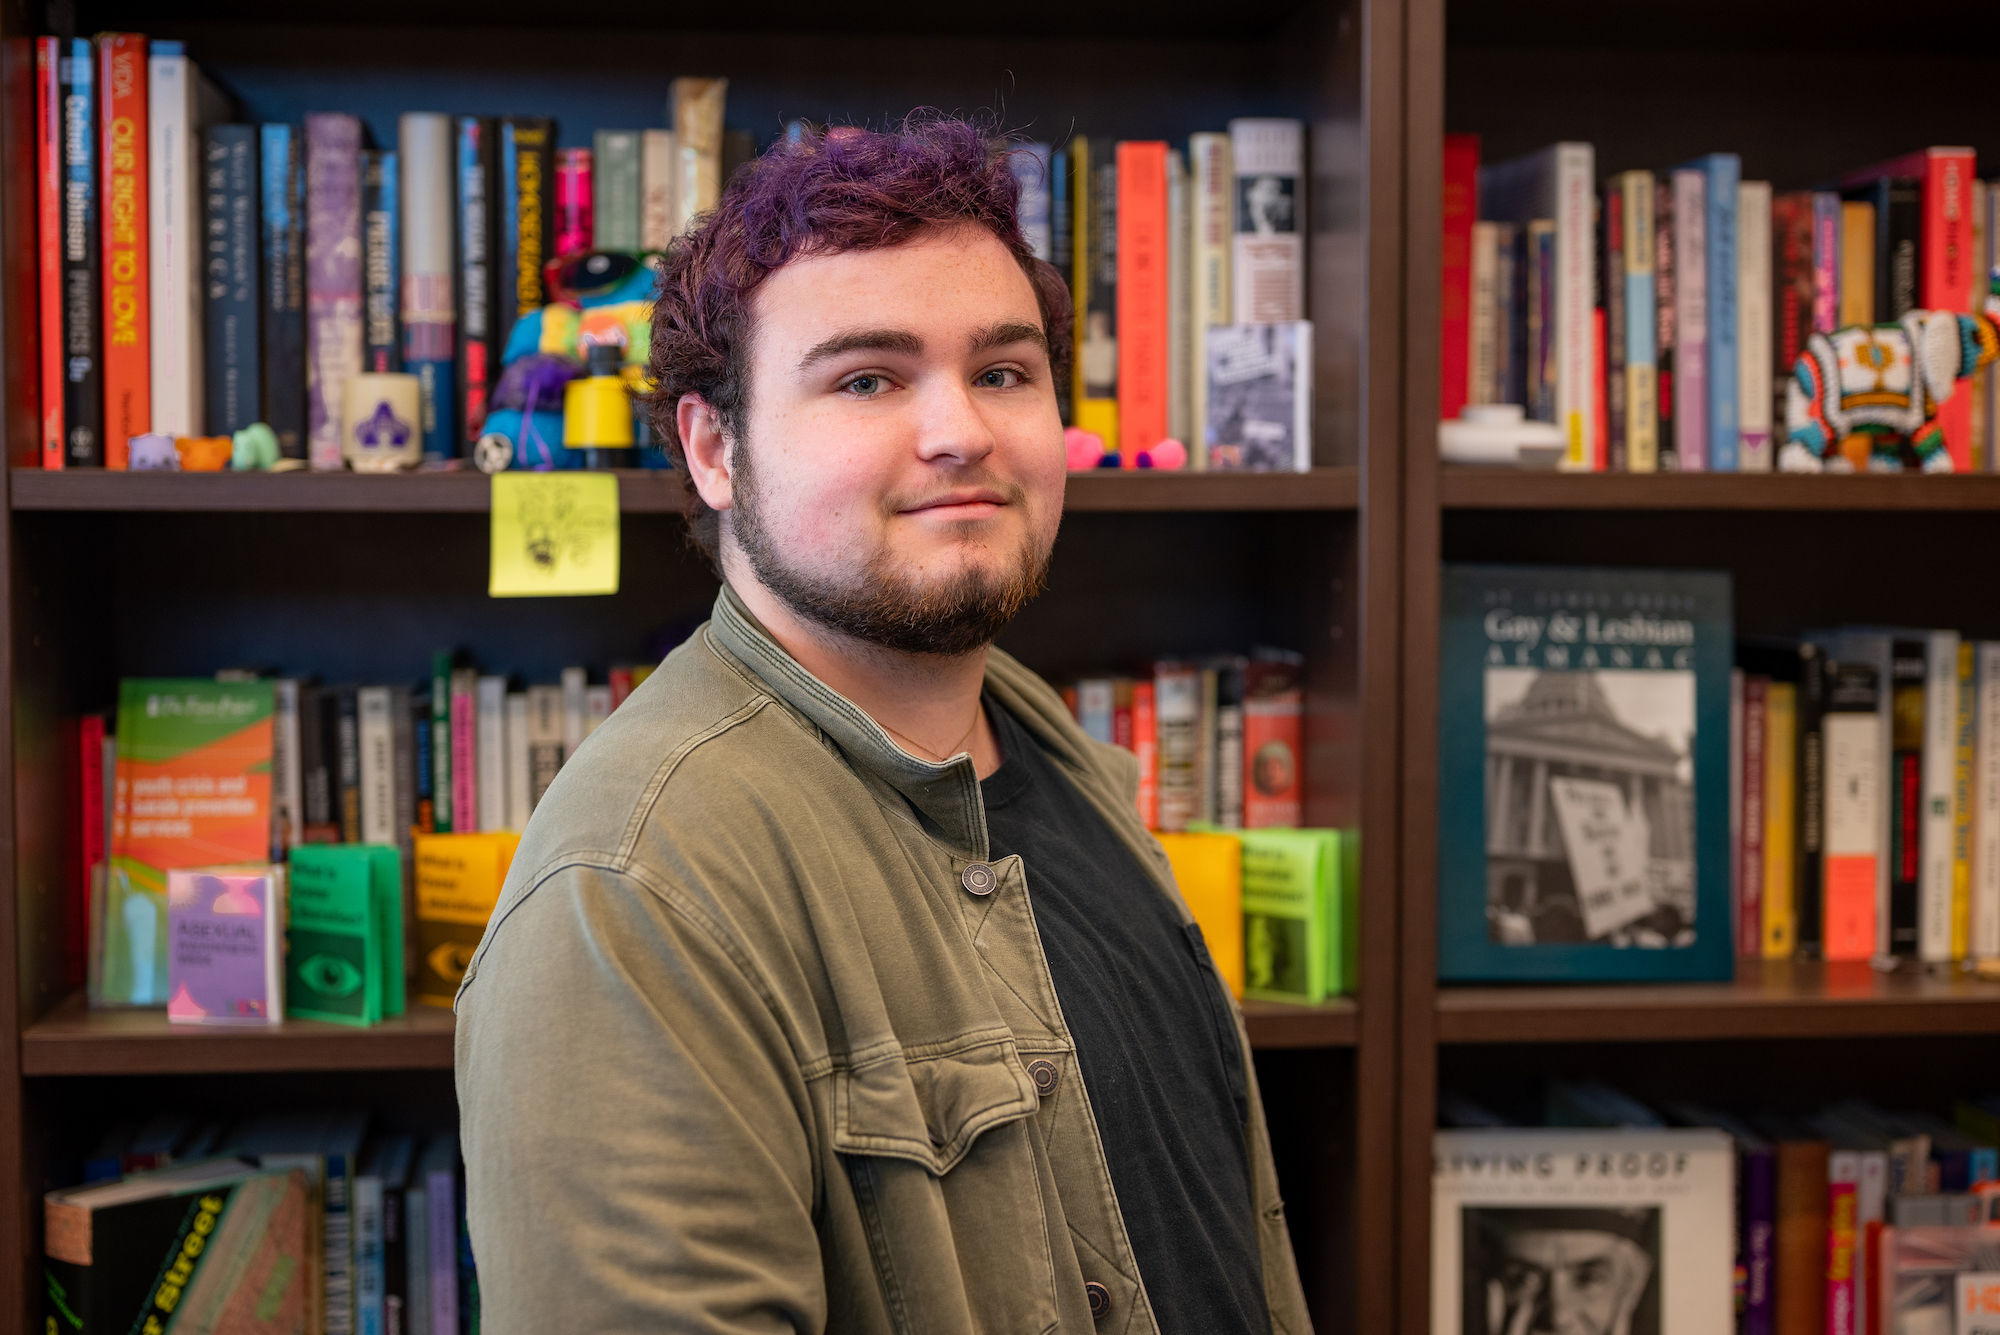 A person with short purple hair and a goatee smiles for a portrait in front of bookshelves.